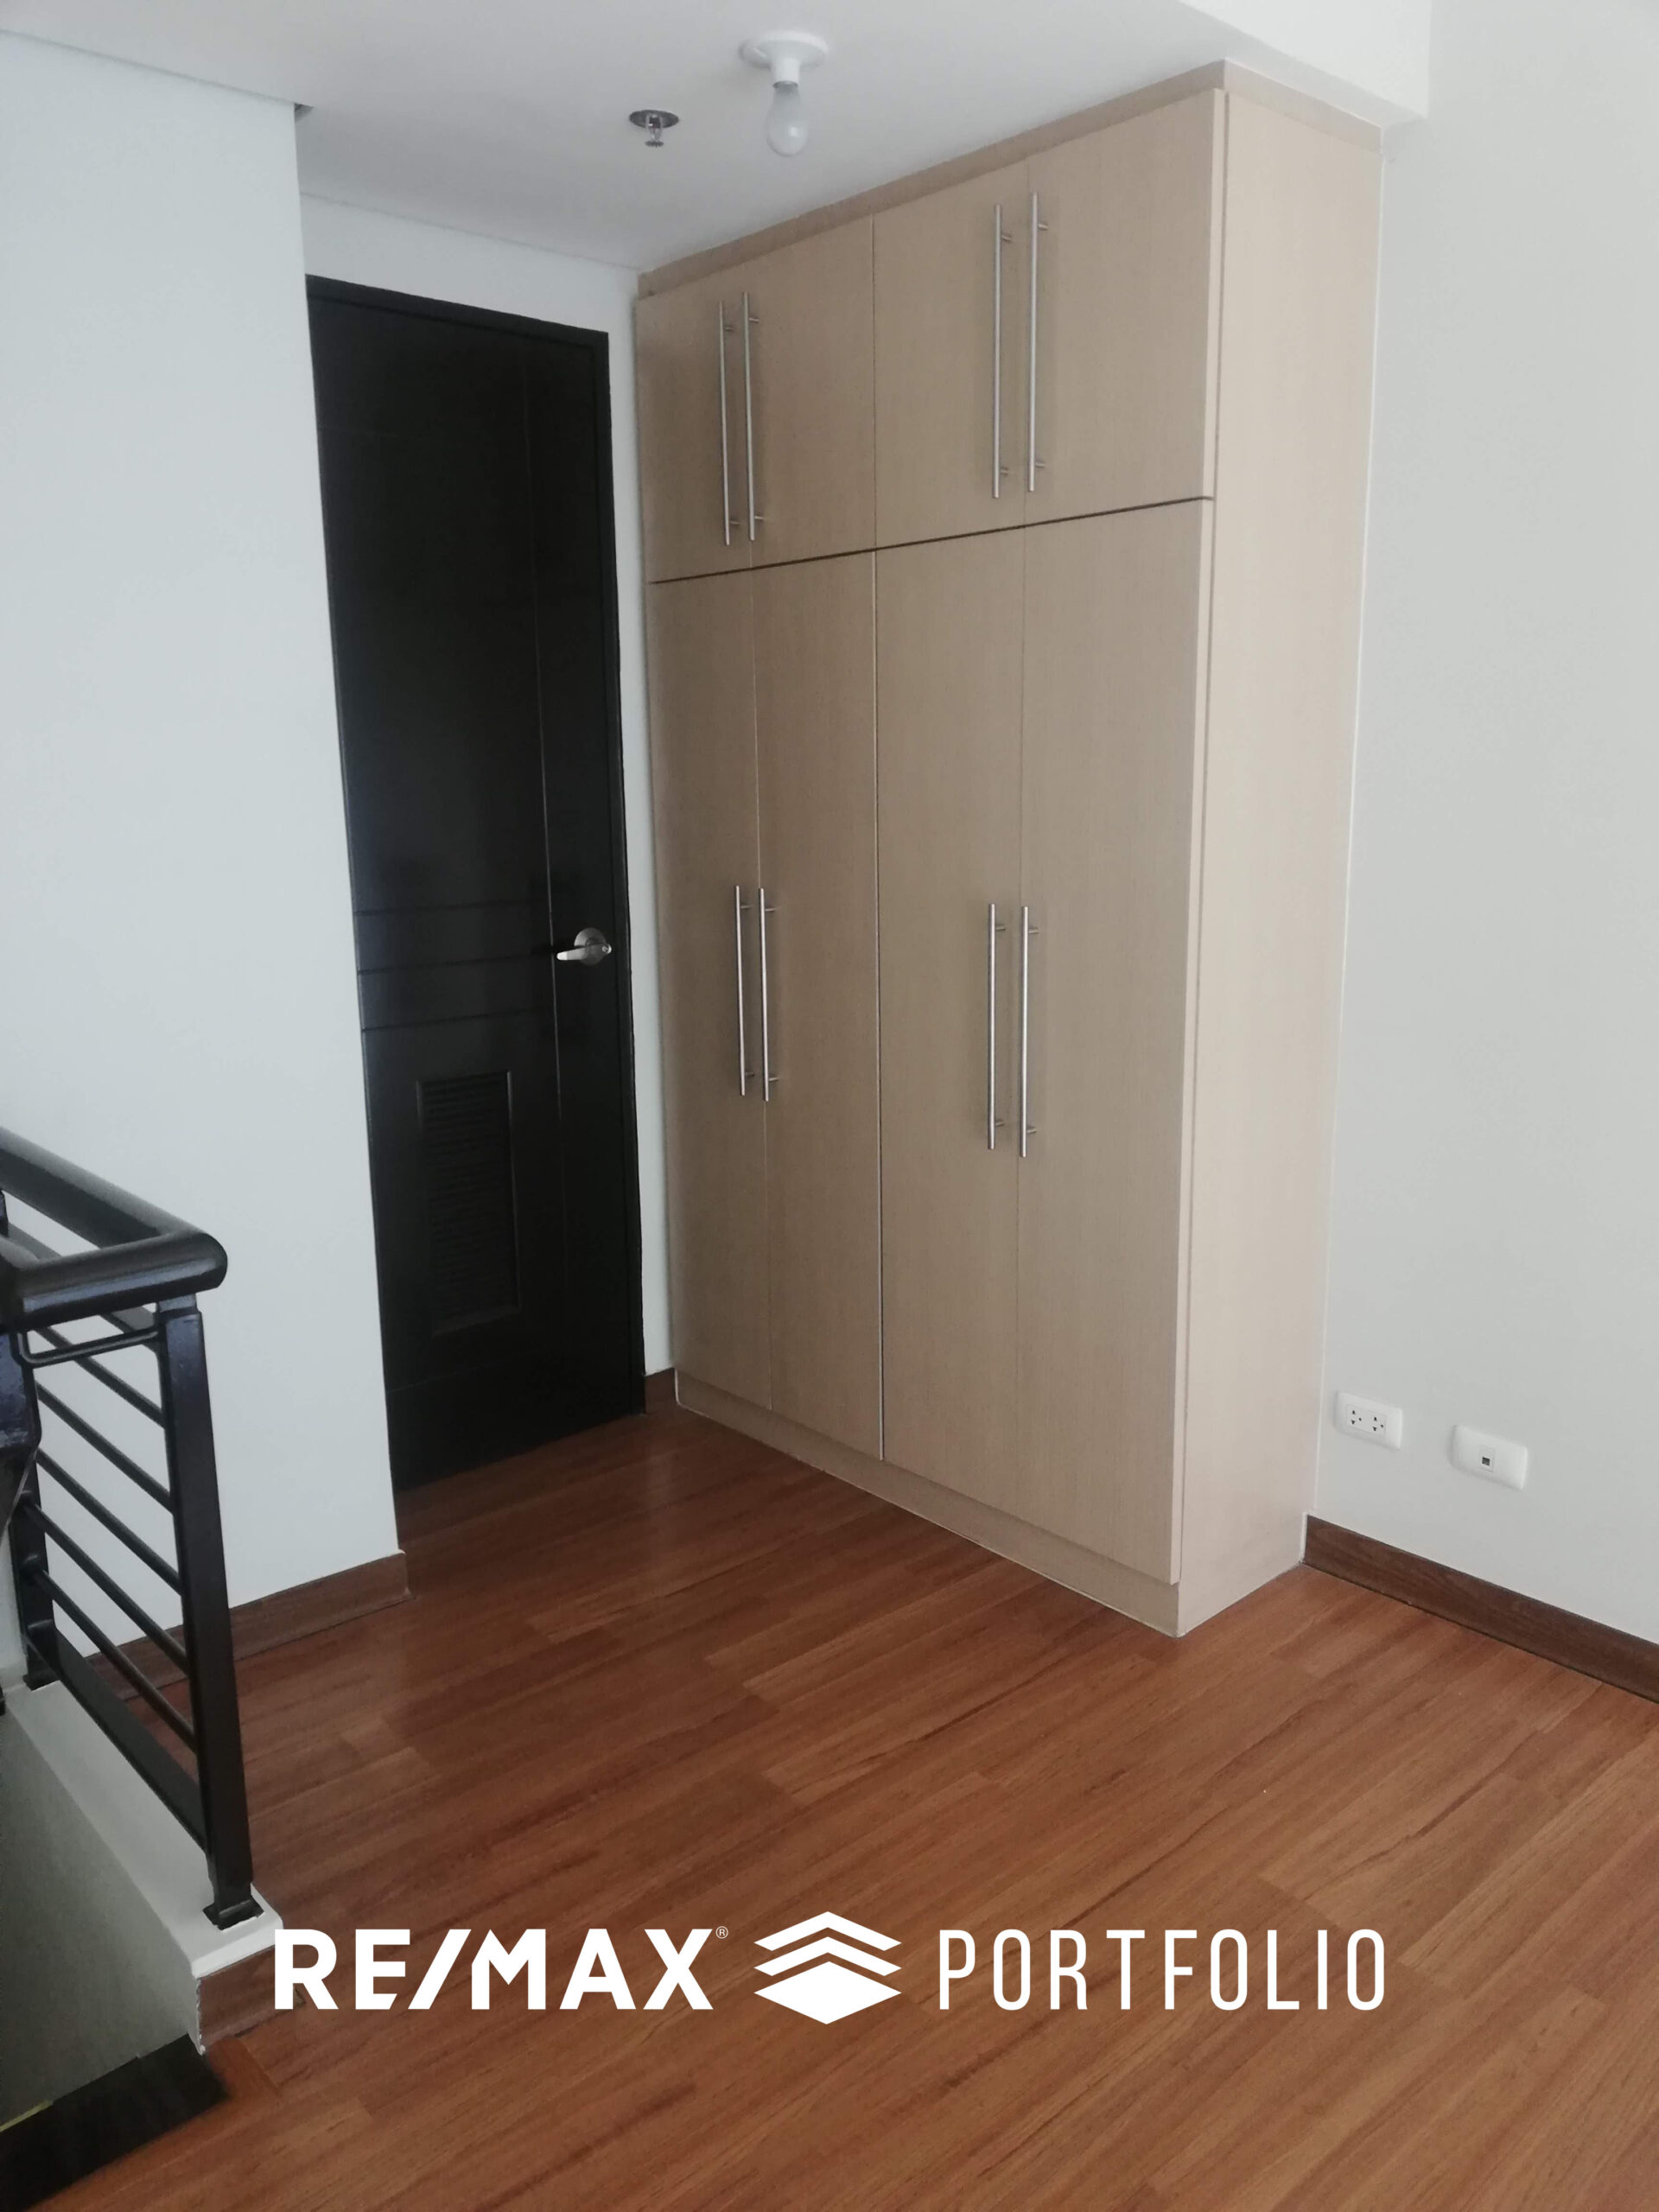 For Lease 1BR Loft Type in Emerald Lofts, Ortigas Center